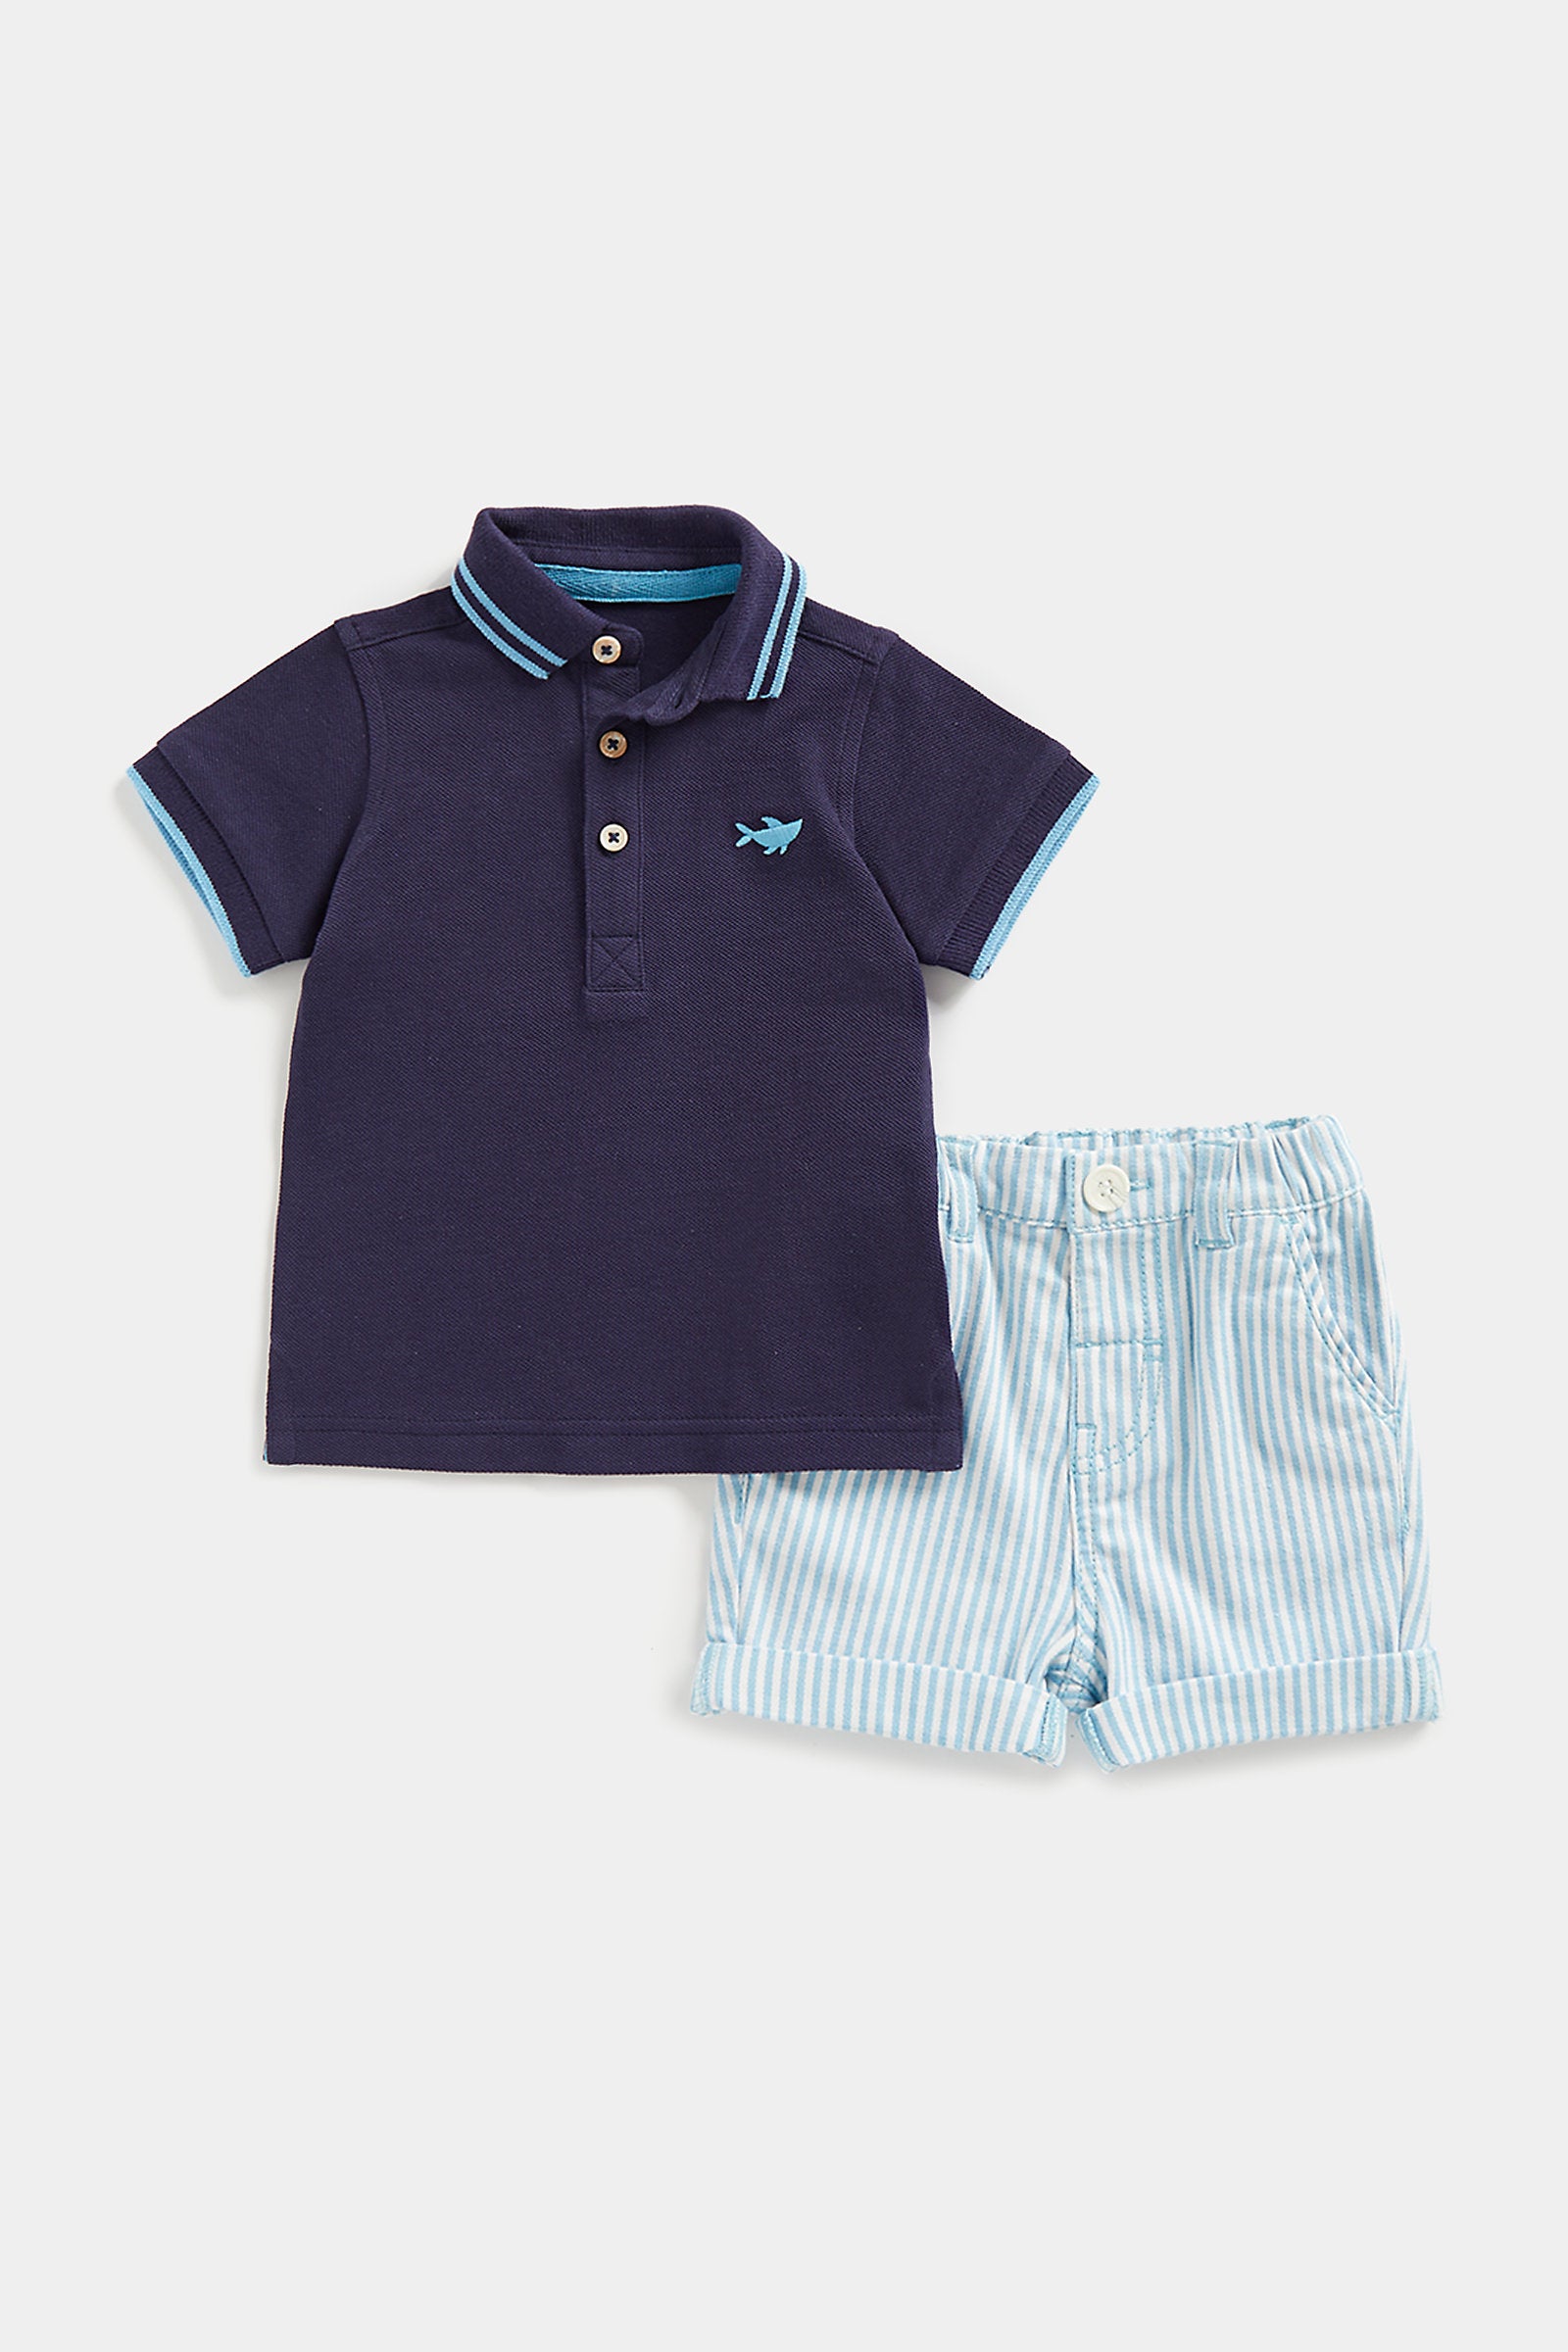 Mothercare Whale Polo Shirt and Shorts Set